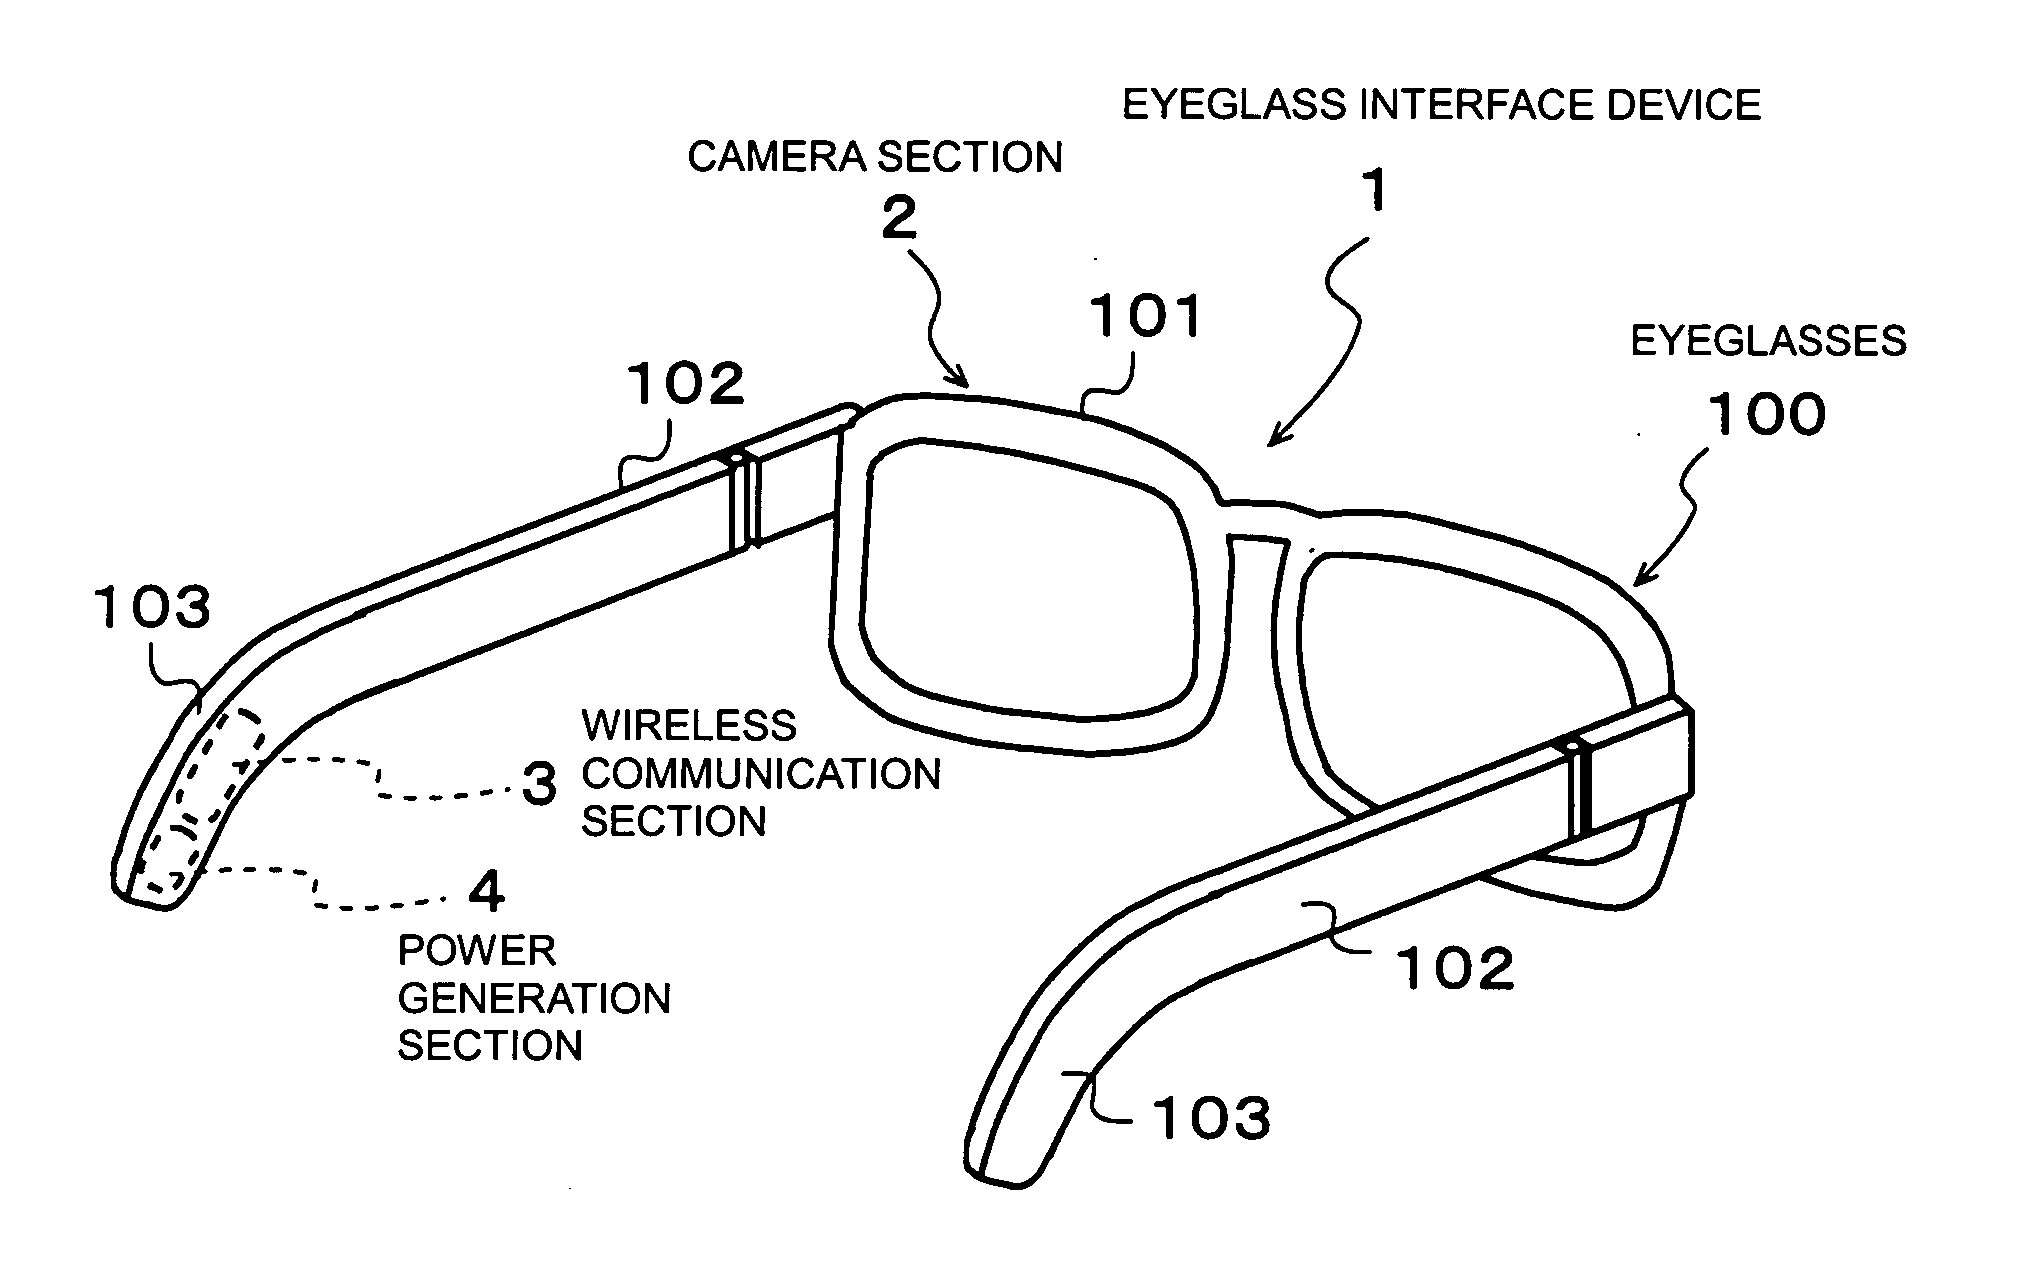 Eyeglass interface device and security system